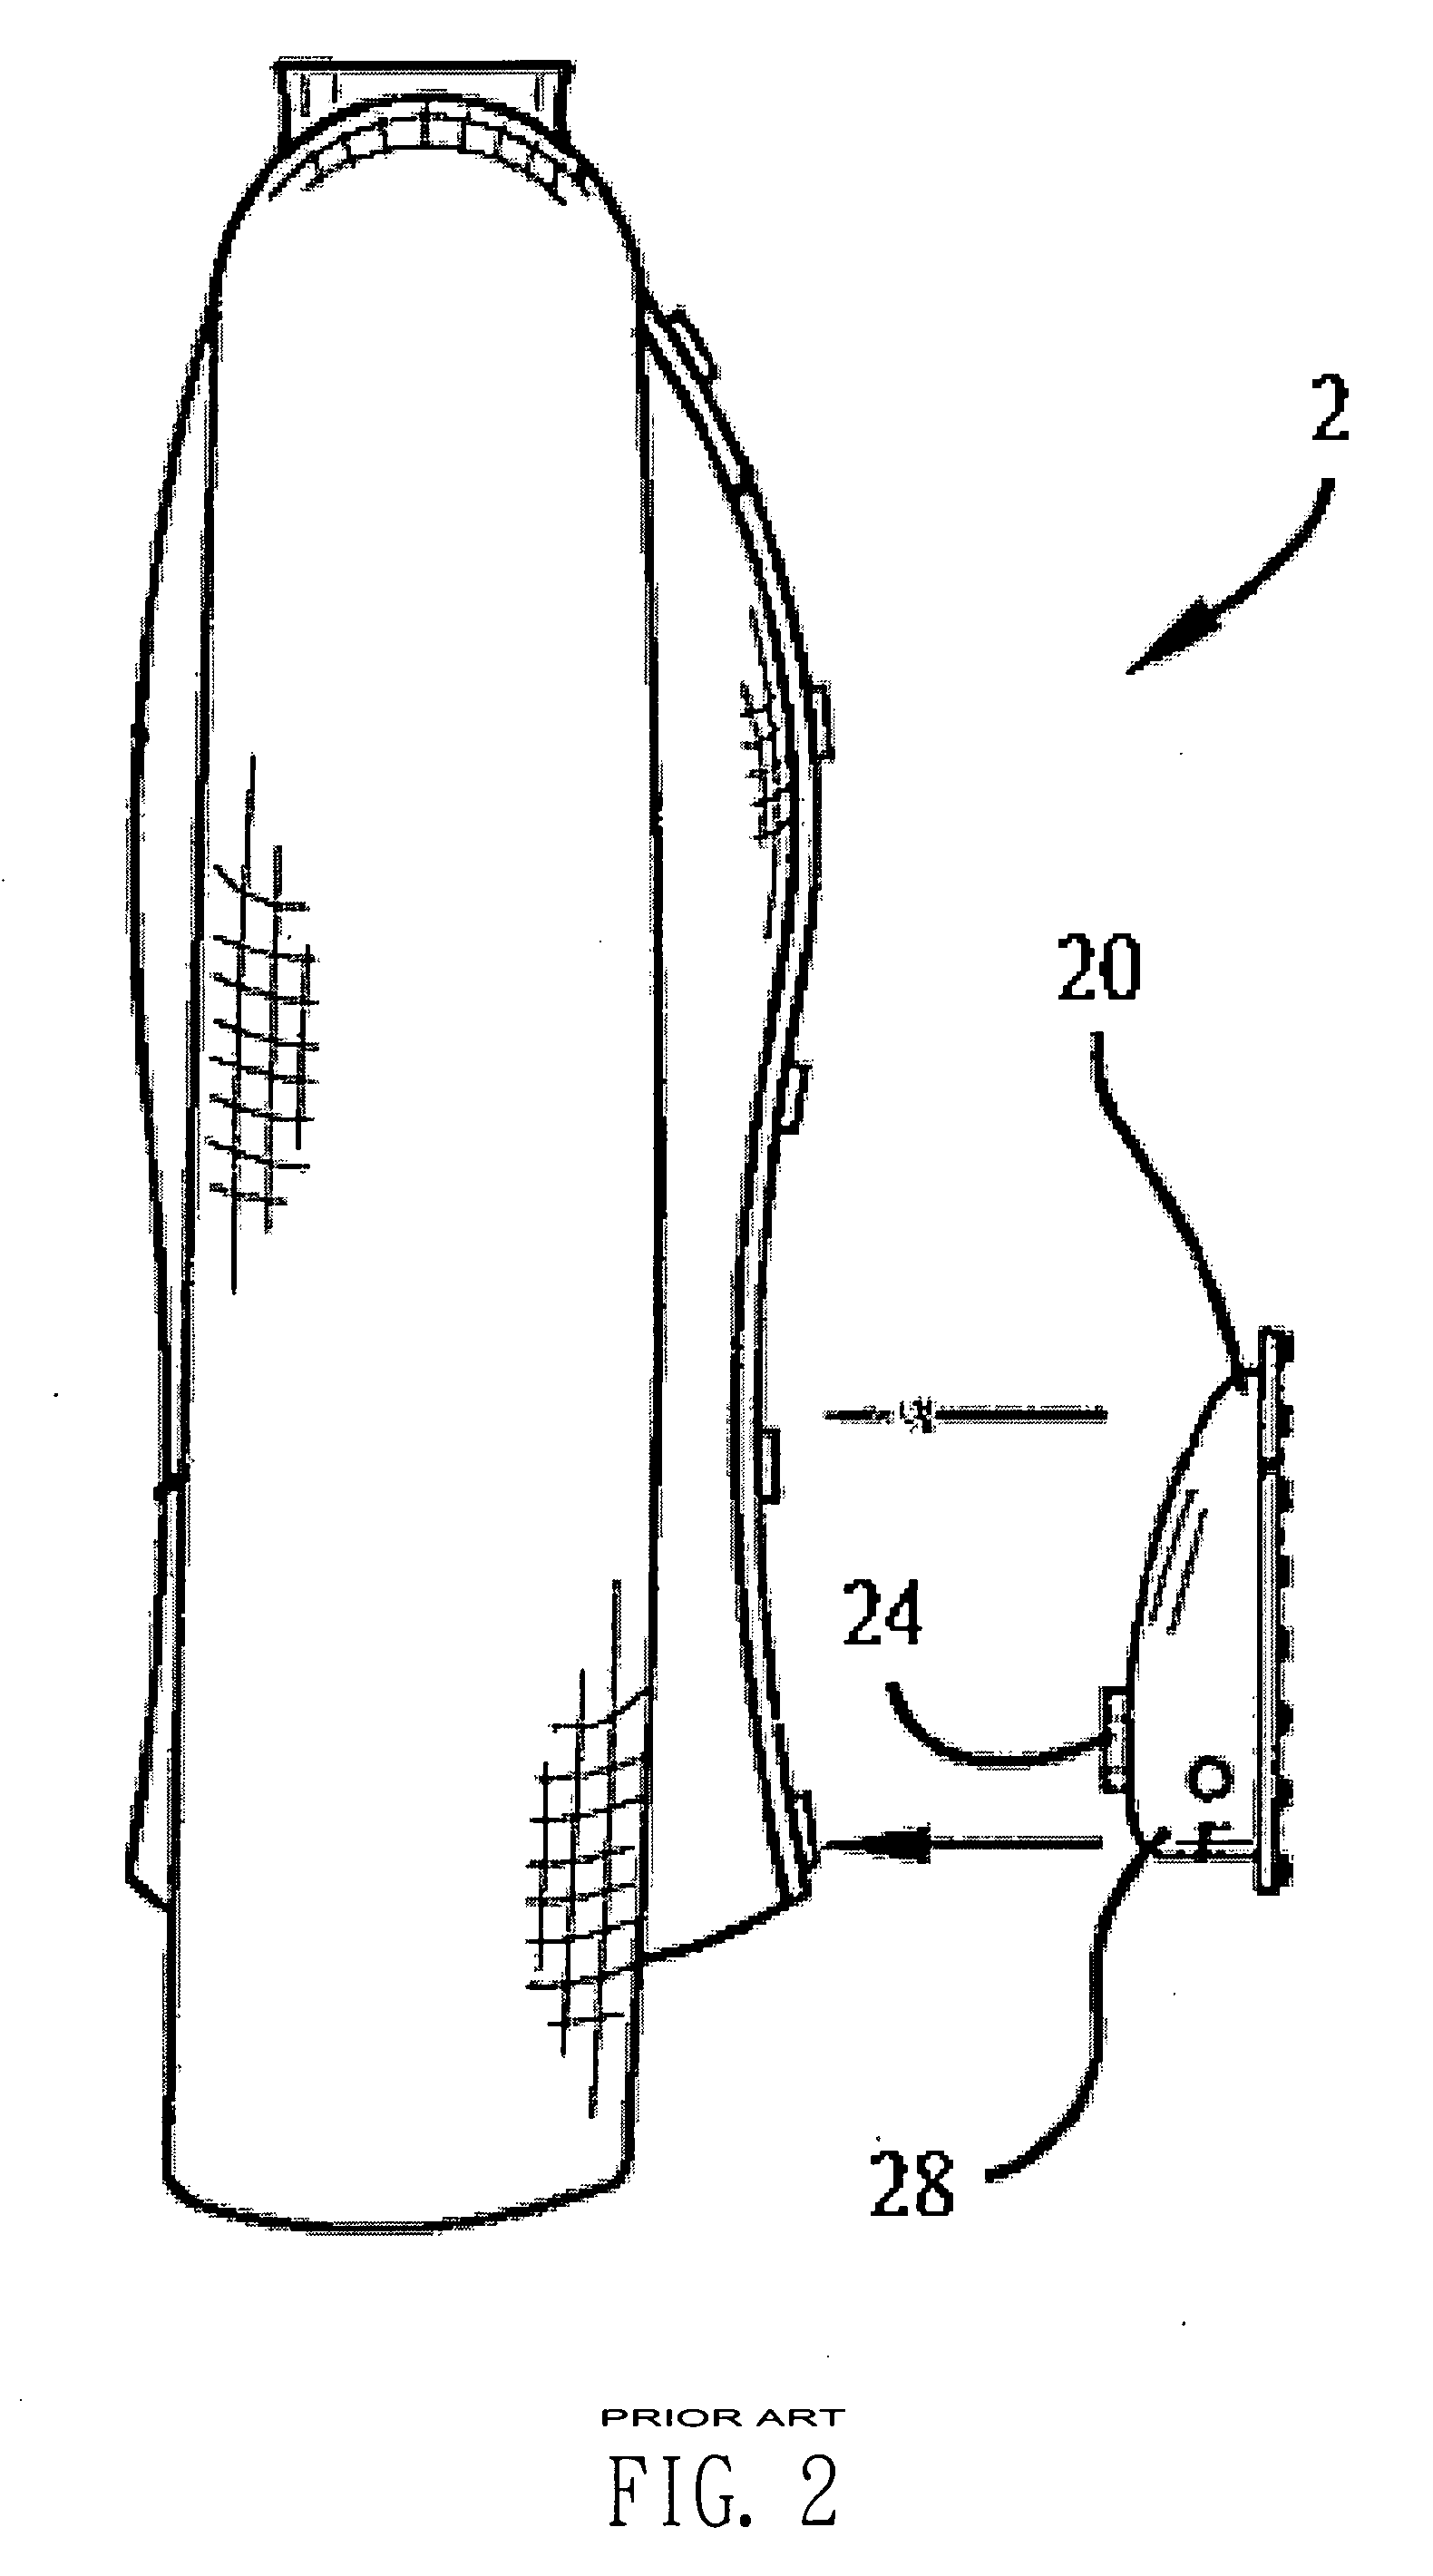 Garment with heating assembly